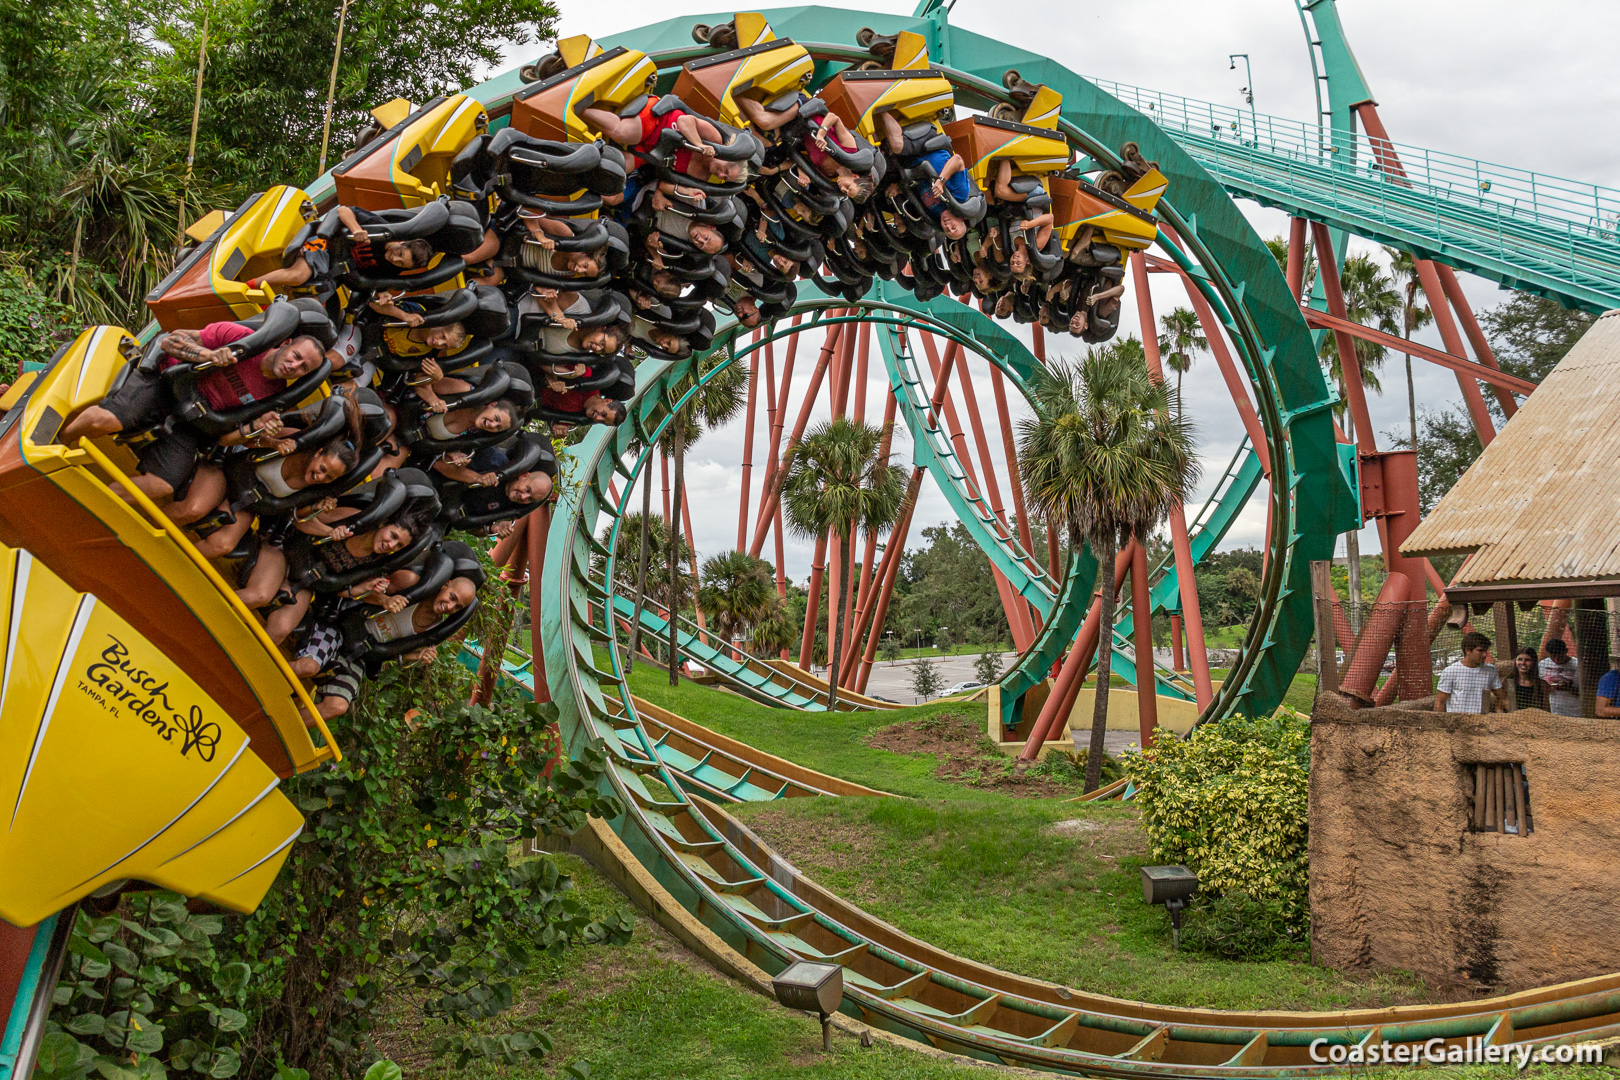 A picture of Kumba roller coaster train going through a corkscrew loop